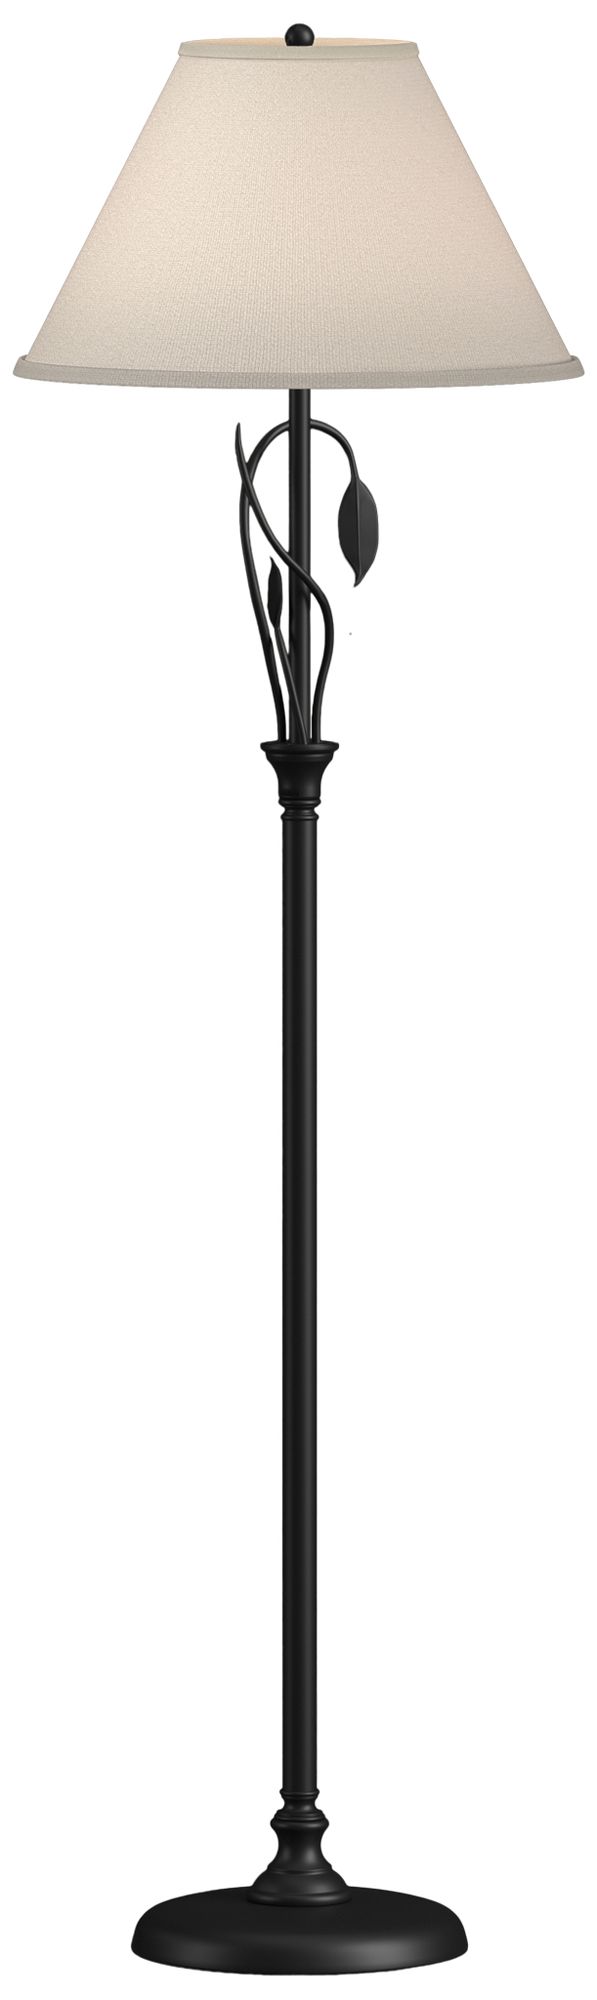 Forged Leaves and Vase 56"H Black Floor Lamp With Natural Linen Shade